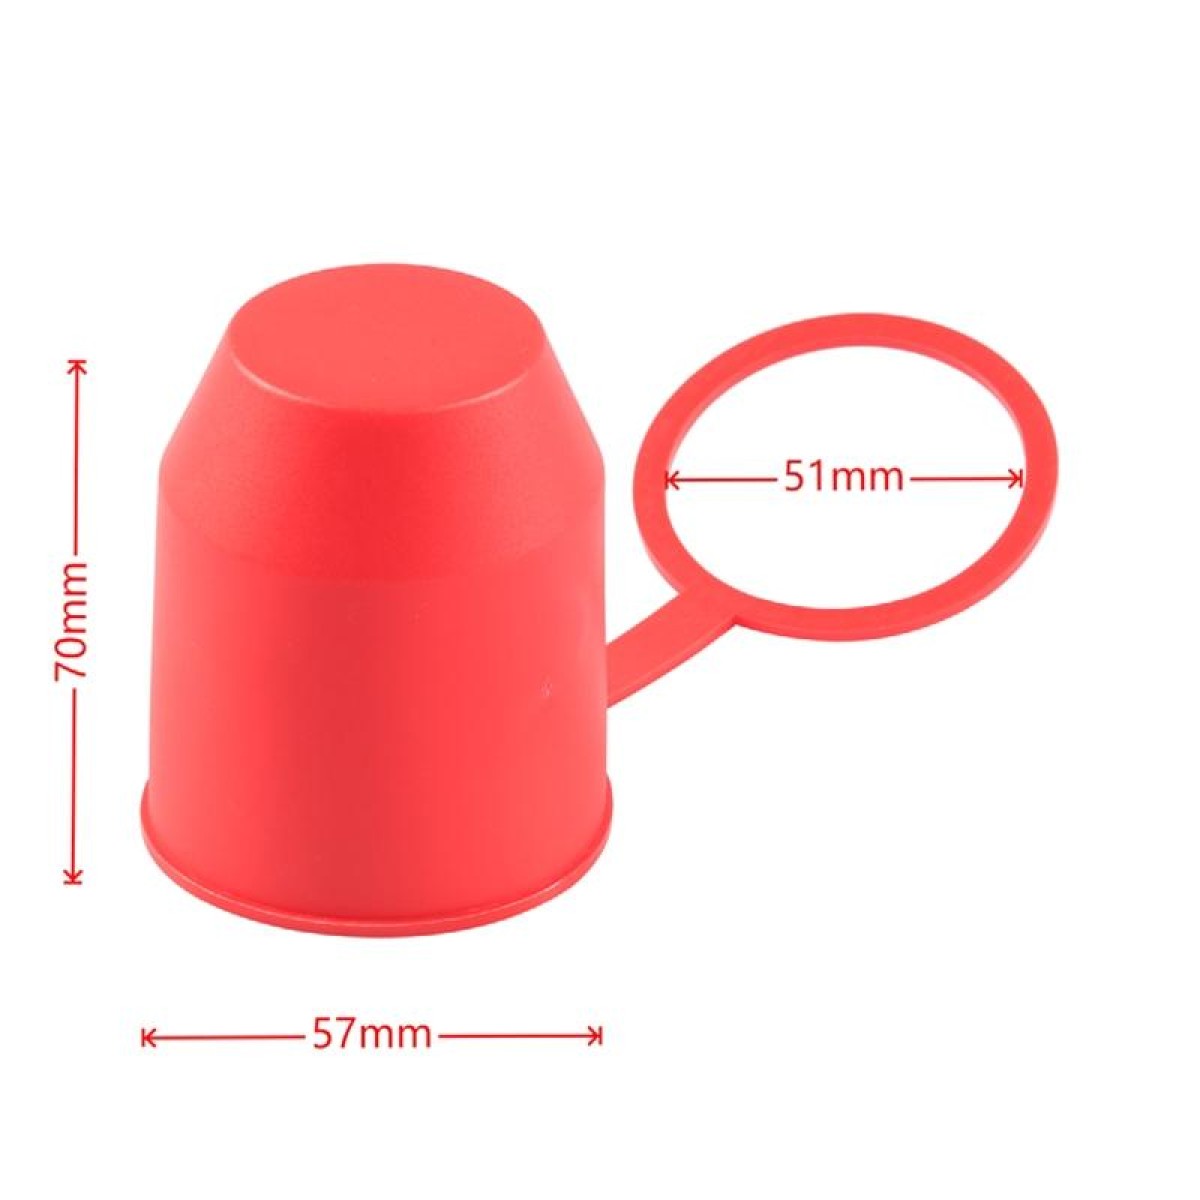 50mm Plastic Car Truck Tow Ball Cover Cap Towing Hitch Trailer Towball Protection (Red)